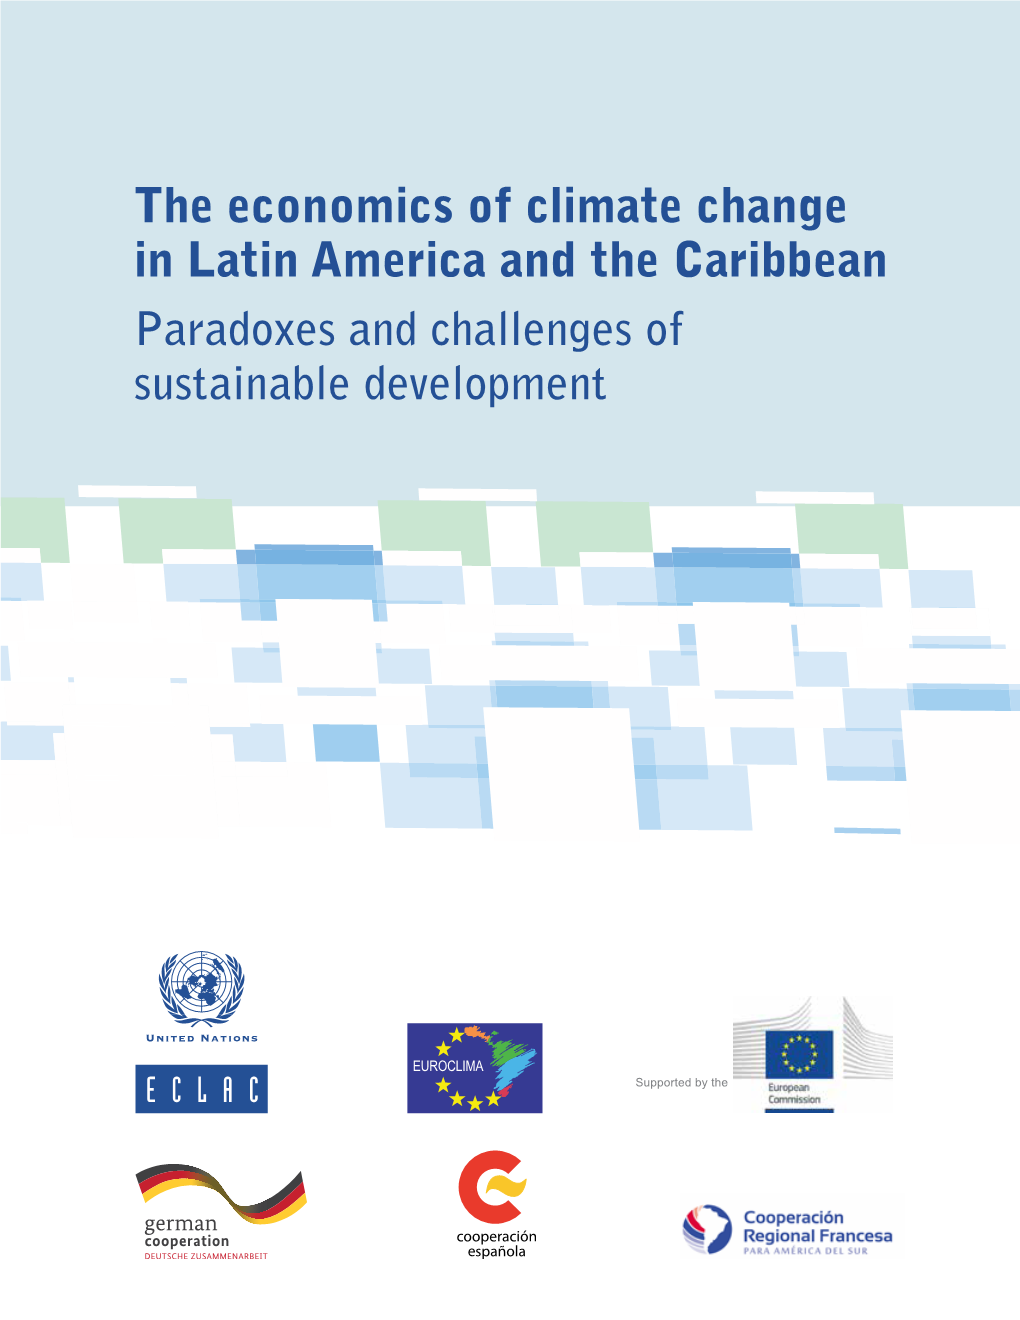 The Economics of Climate Change in Latin America and the Caribbean Paradoxes and Challenges of Sustainable Development